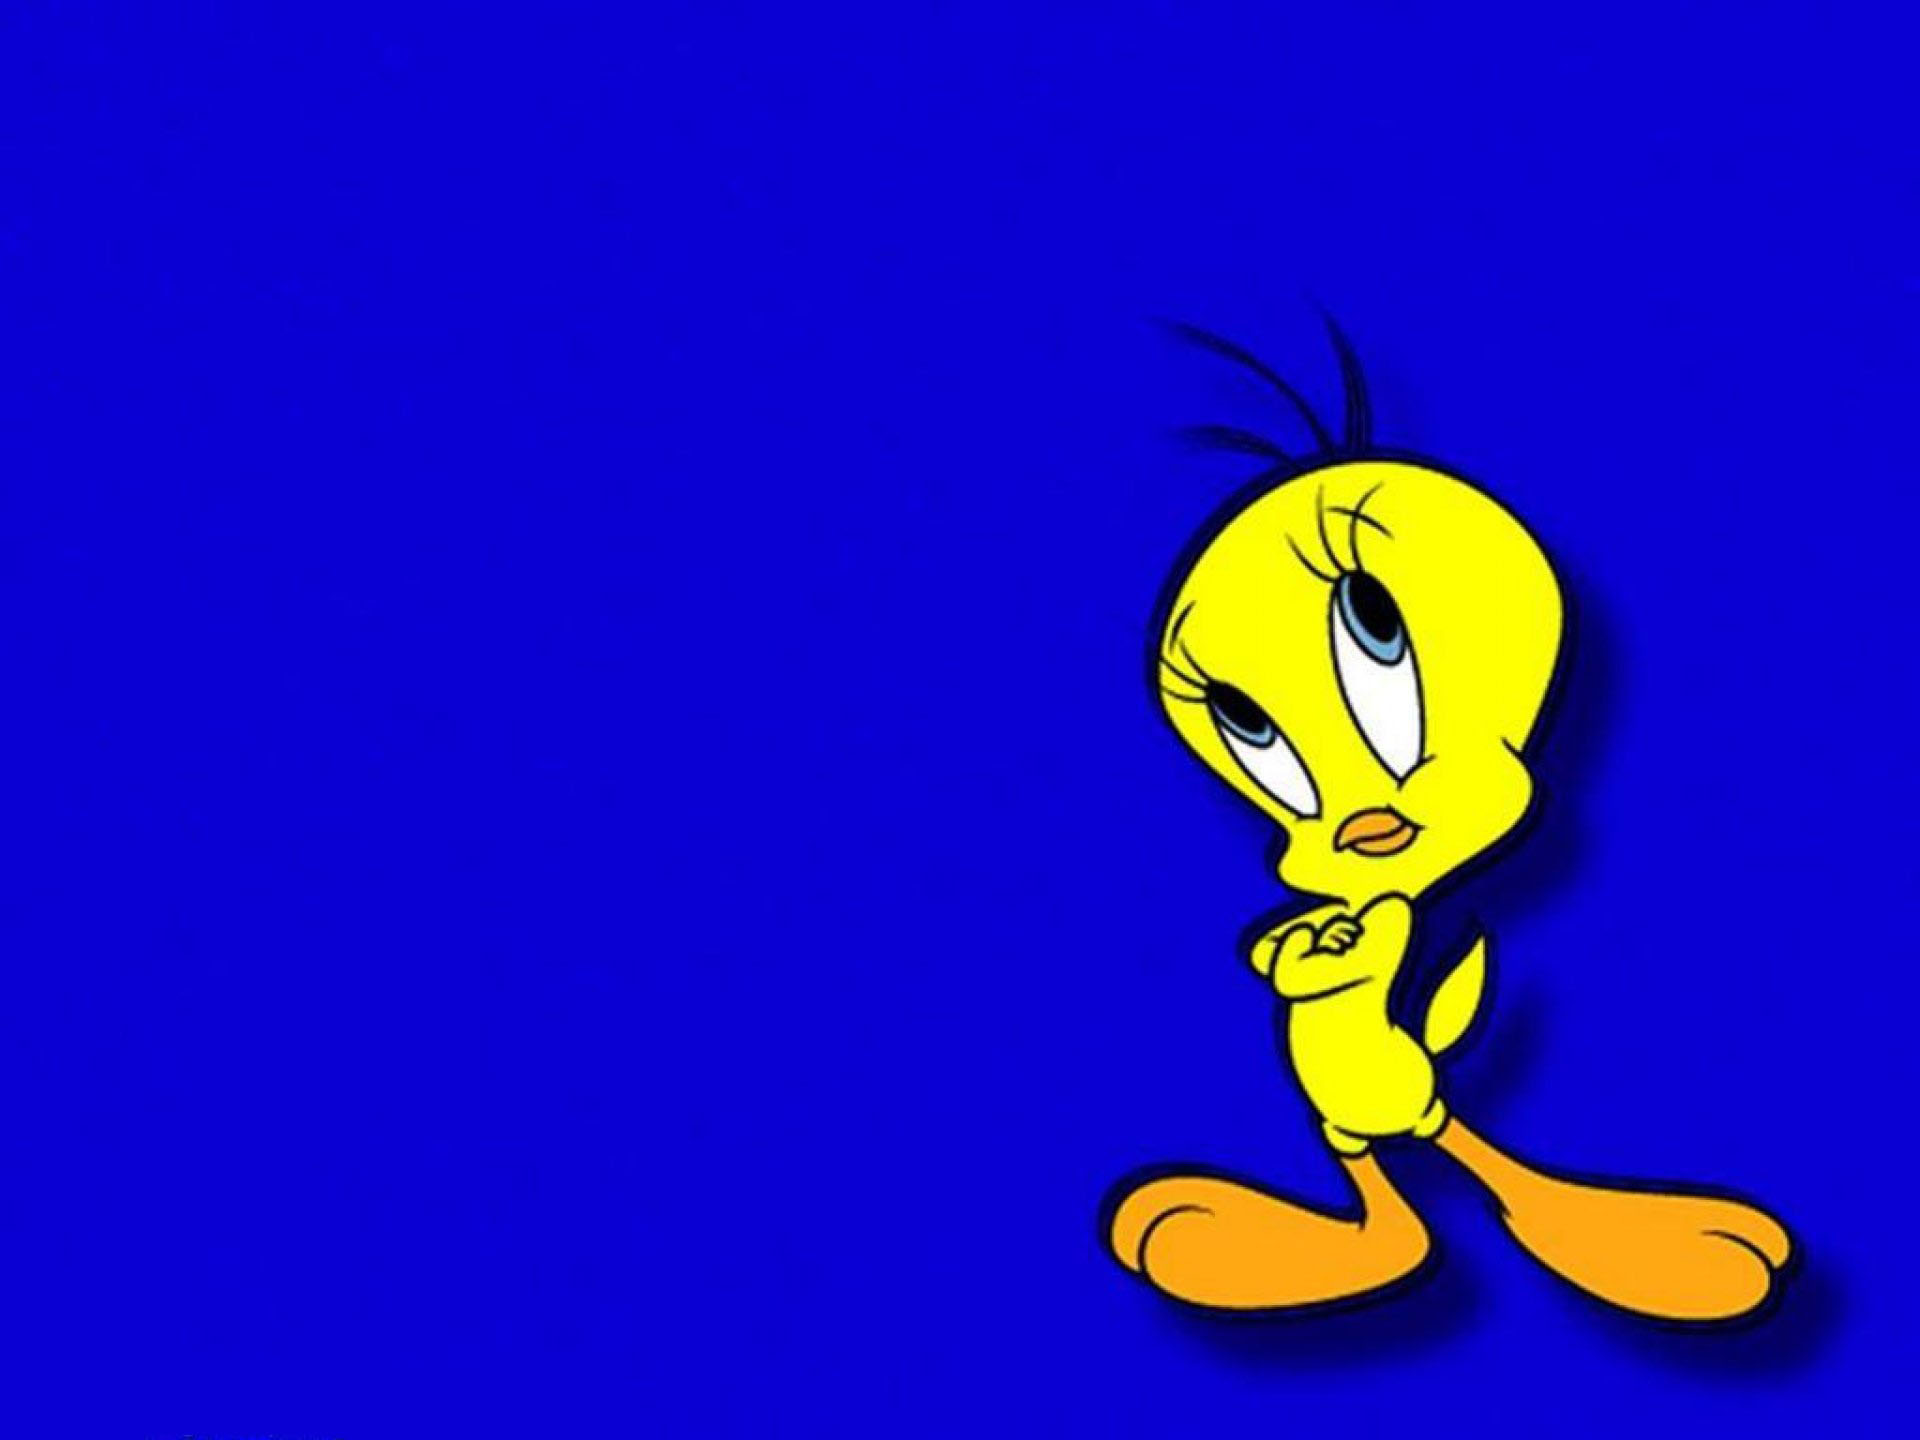 Tweety Bird Wallpapers Cure Free Download – Daily Backgrounds in HD